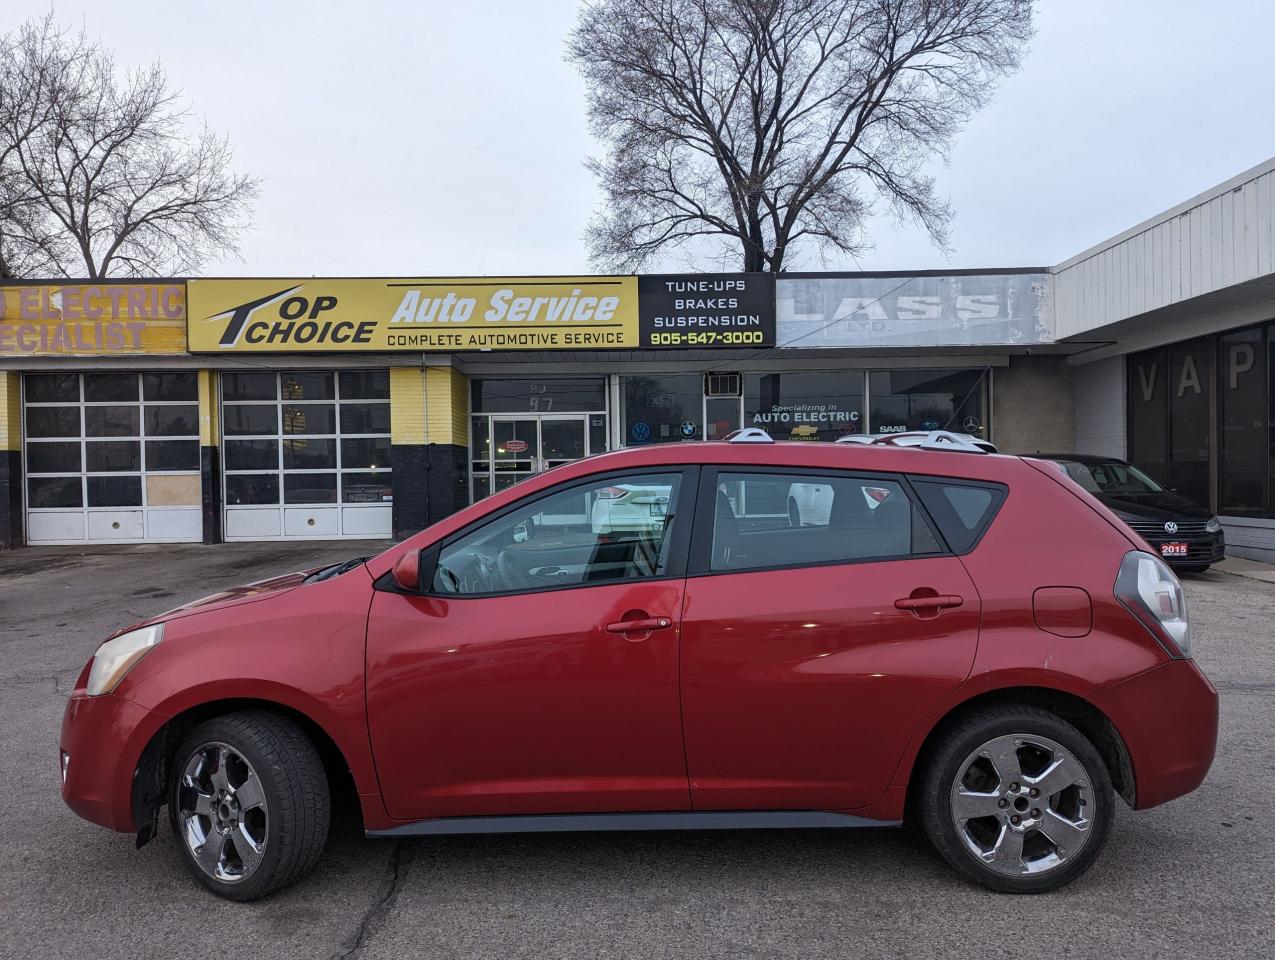 2009 Pontiac Vibe AWD *Drives Excellent/Free Winter Tires On Rims* - Photo #4